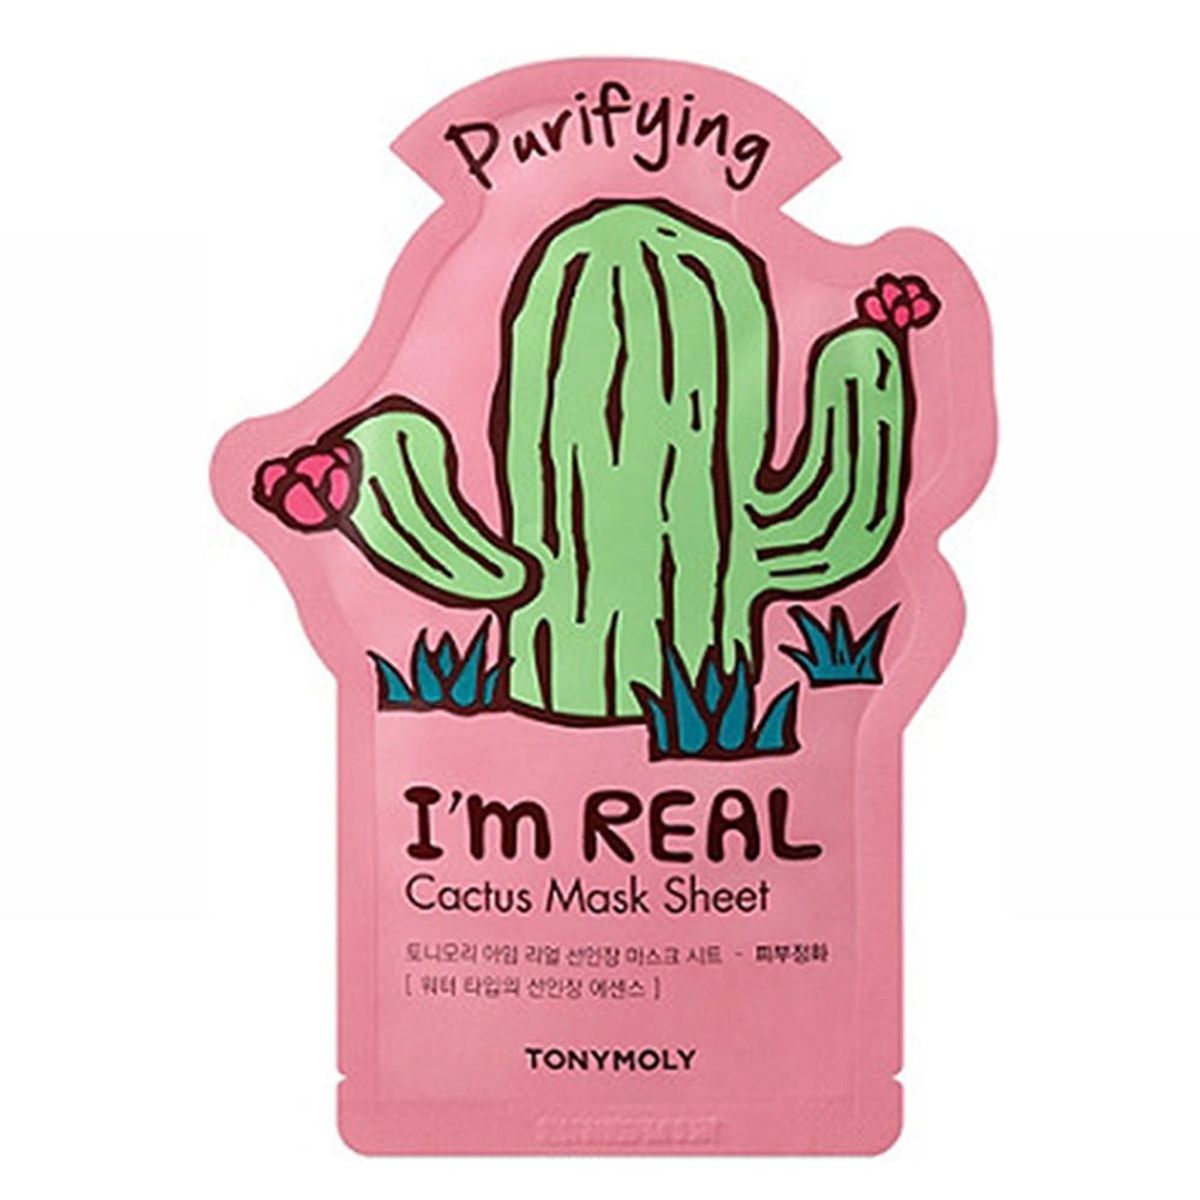 8 Cactus Water Skincare Products to Soothe and Hydrate Your Complexion